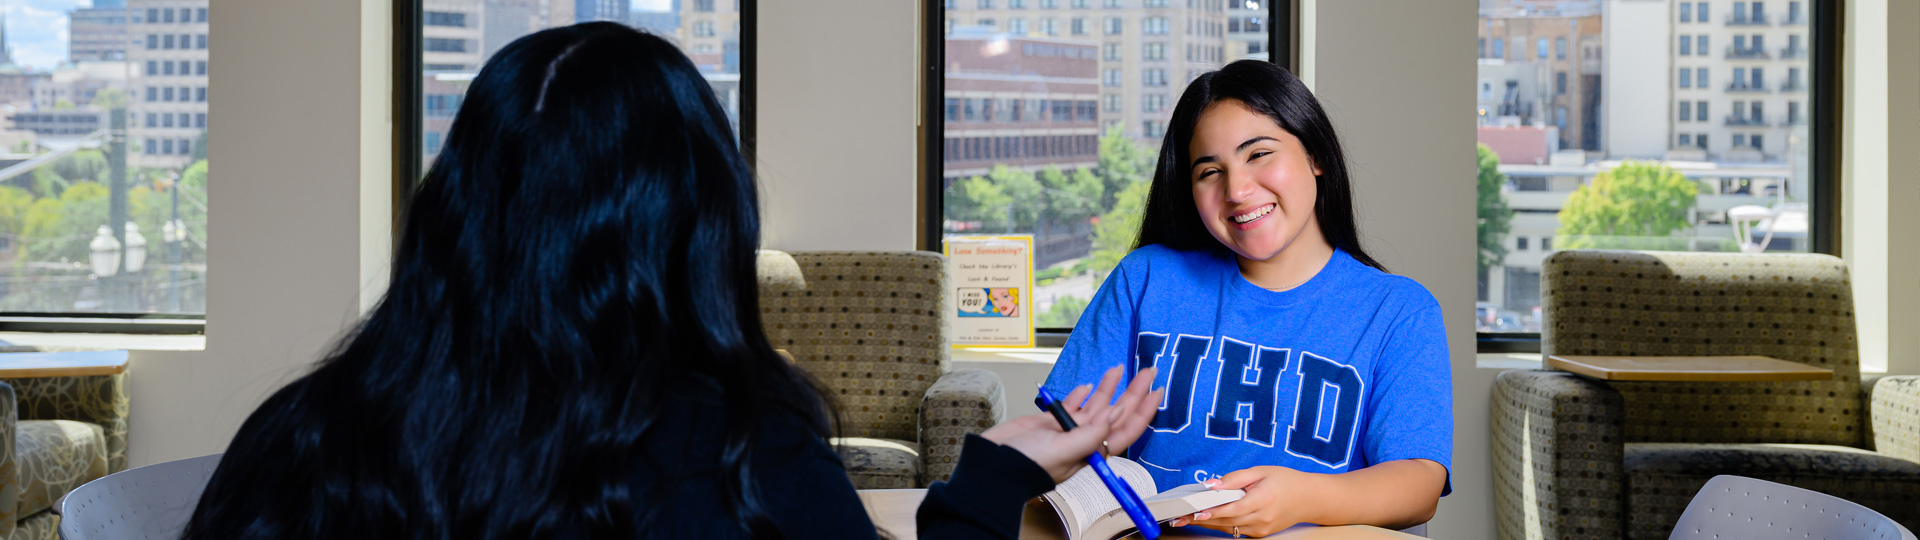 Two UHD students sitting at a table on campus, talking and smiling 